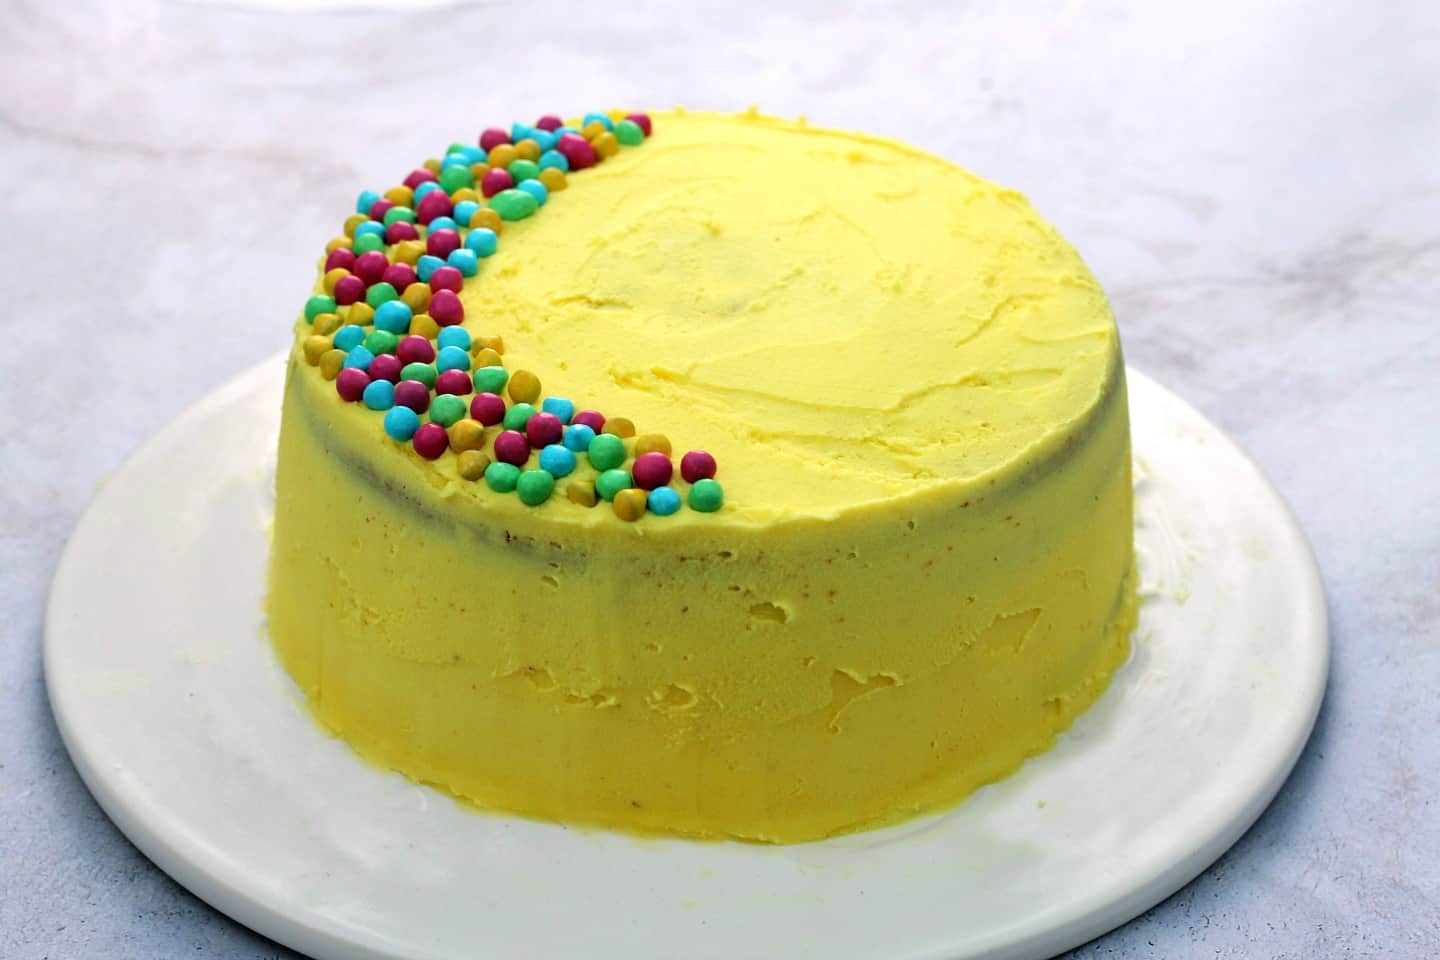 Side view of cake with yellow frosting and multicoloured sprinkles.